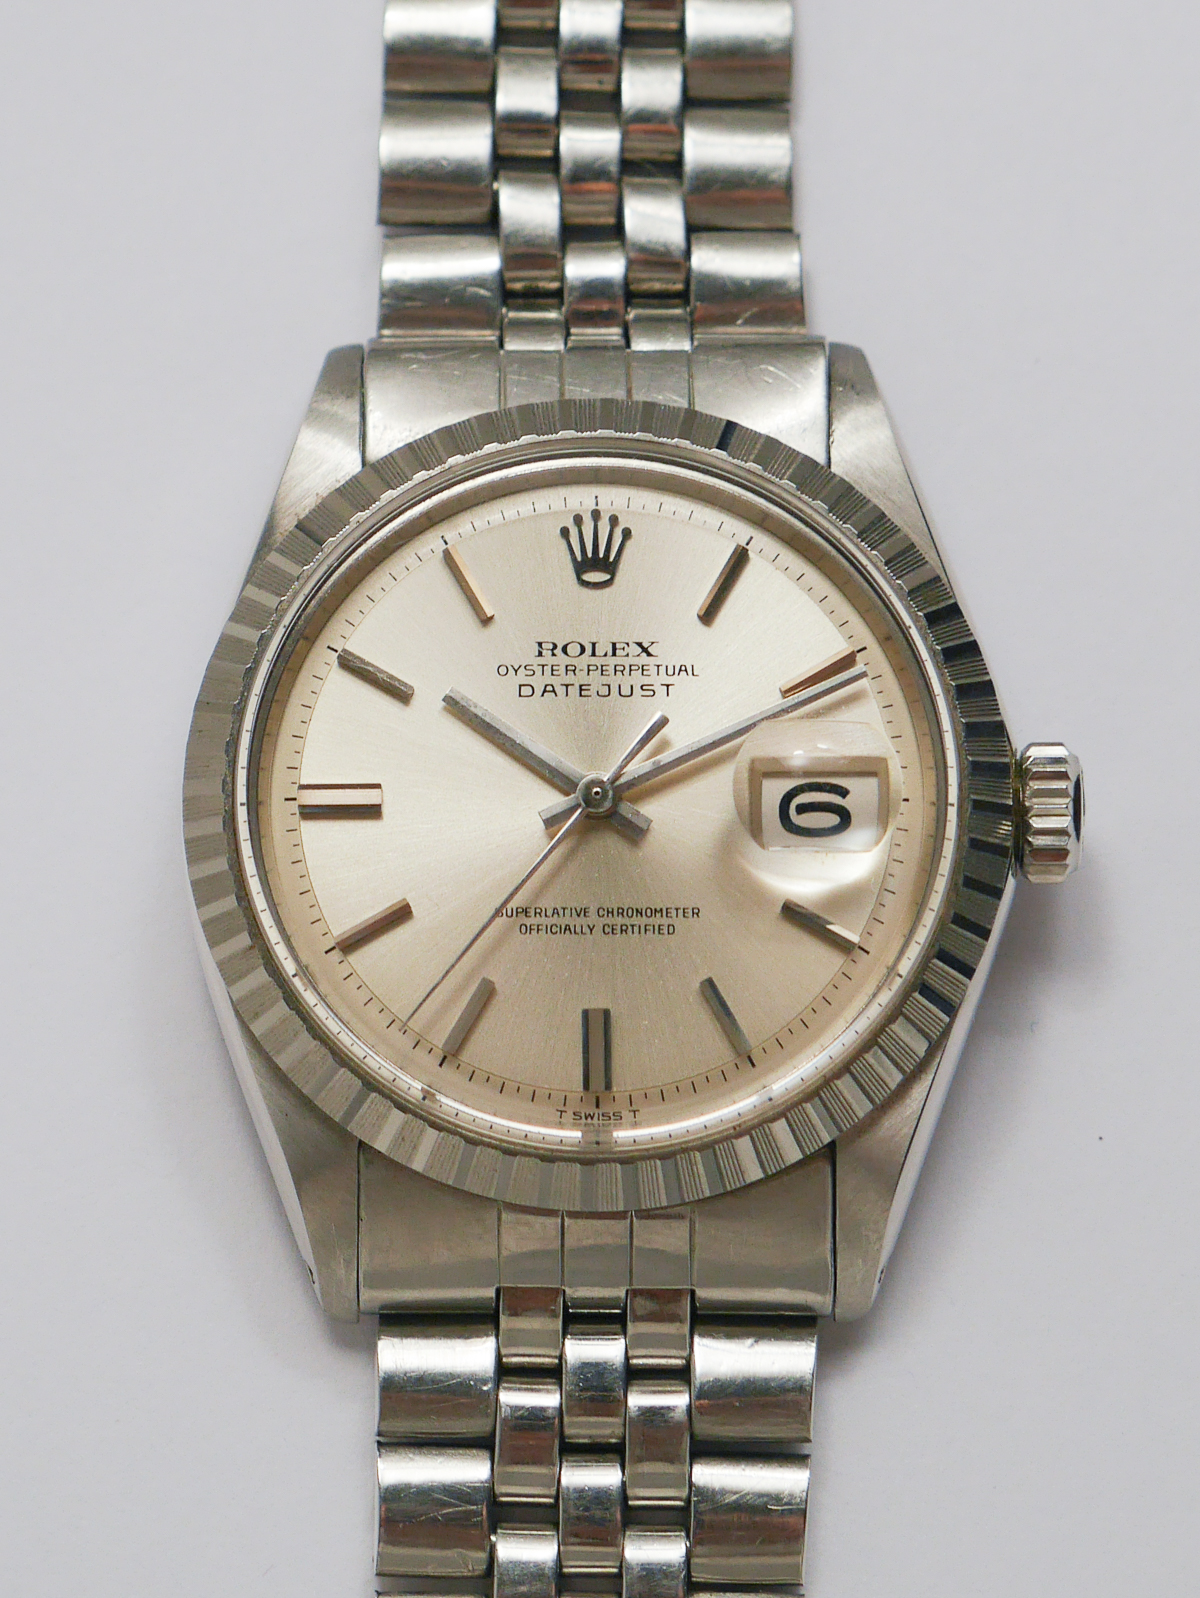 Rolex Oyster Perpetual Datejust 1601 3 Sabiwatches